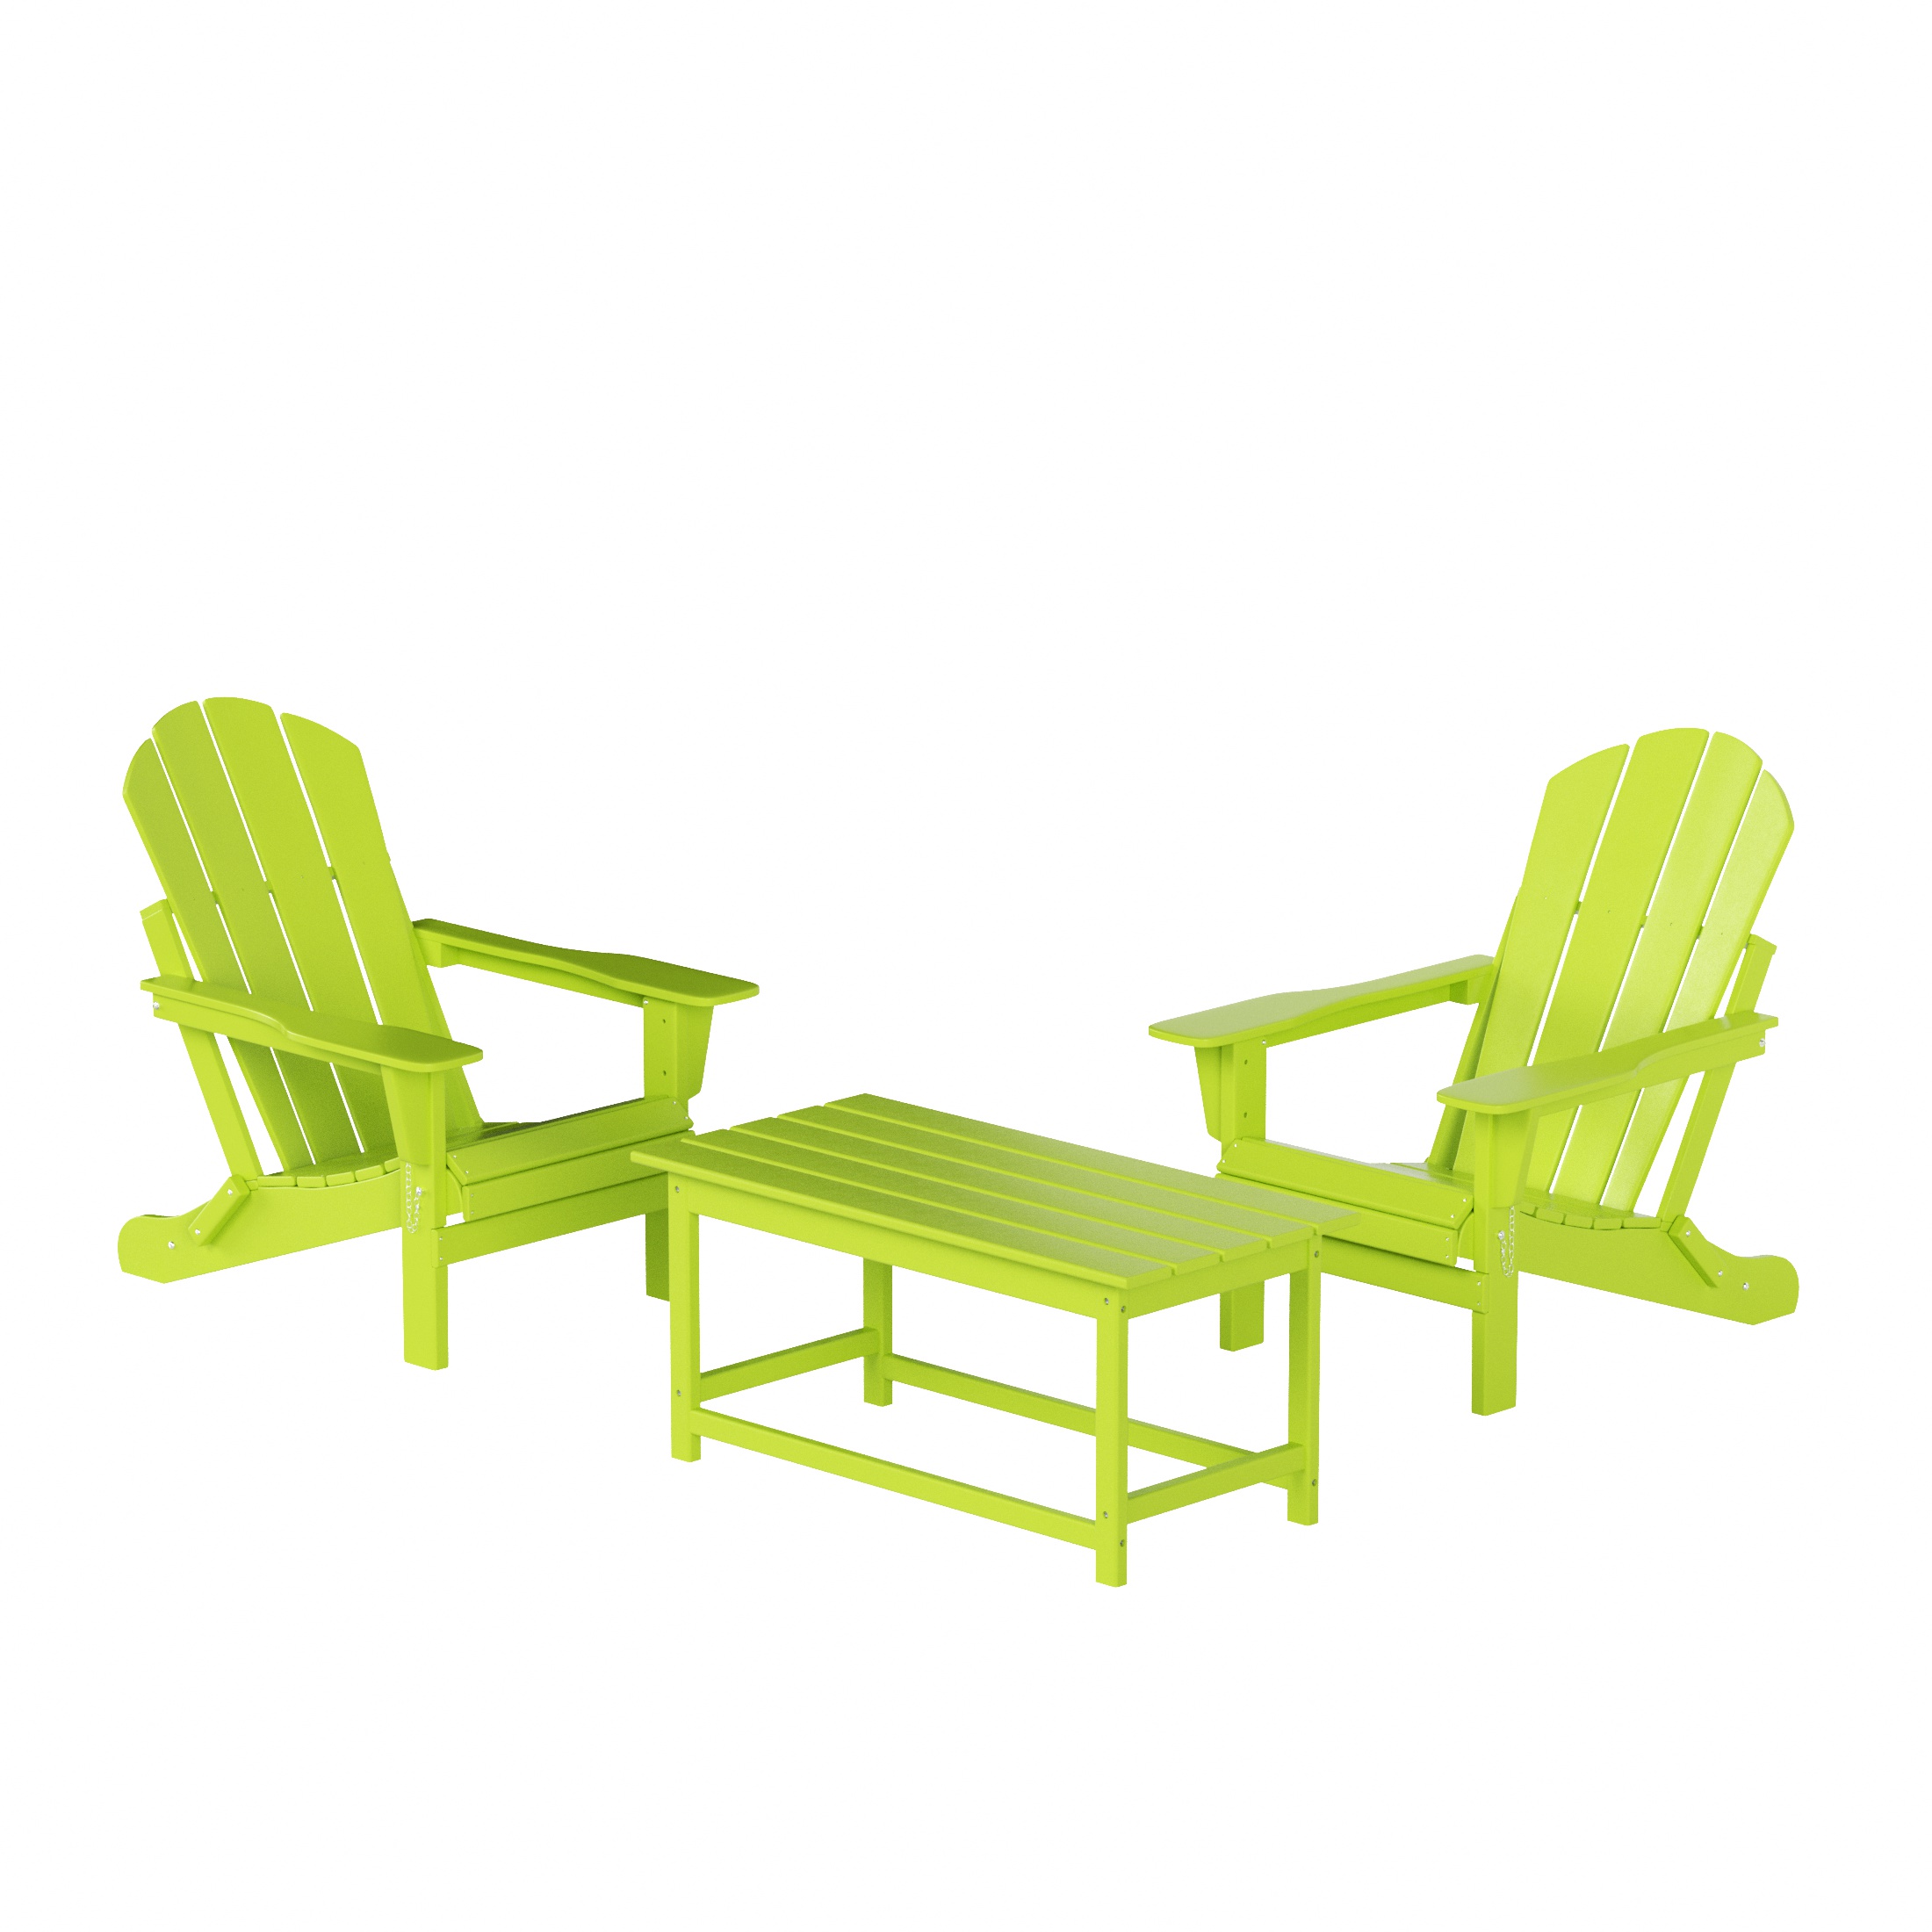 WestinTrends Malibu 3-Pieces Outdoor Patio Furniture Set, All Weather Outdoor Seating Plastic Adirondack Chair Set of 2 with Coffee Table for Porch Lawn Backyard, Lime - image 1 of 7